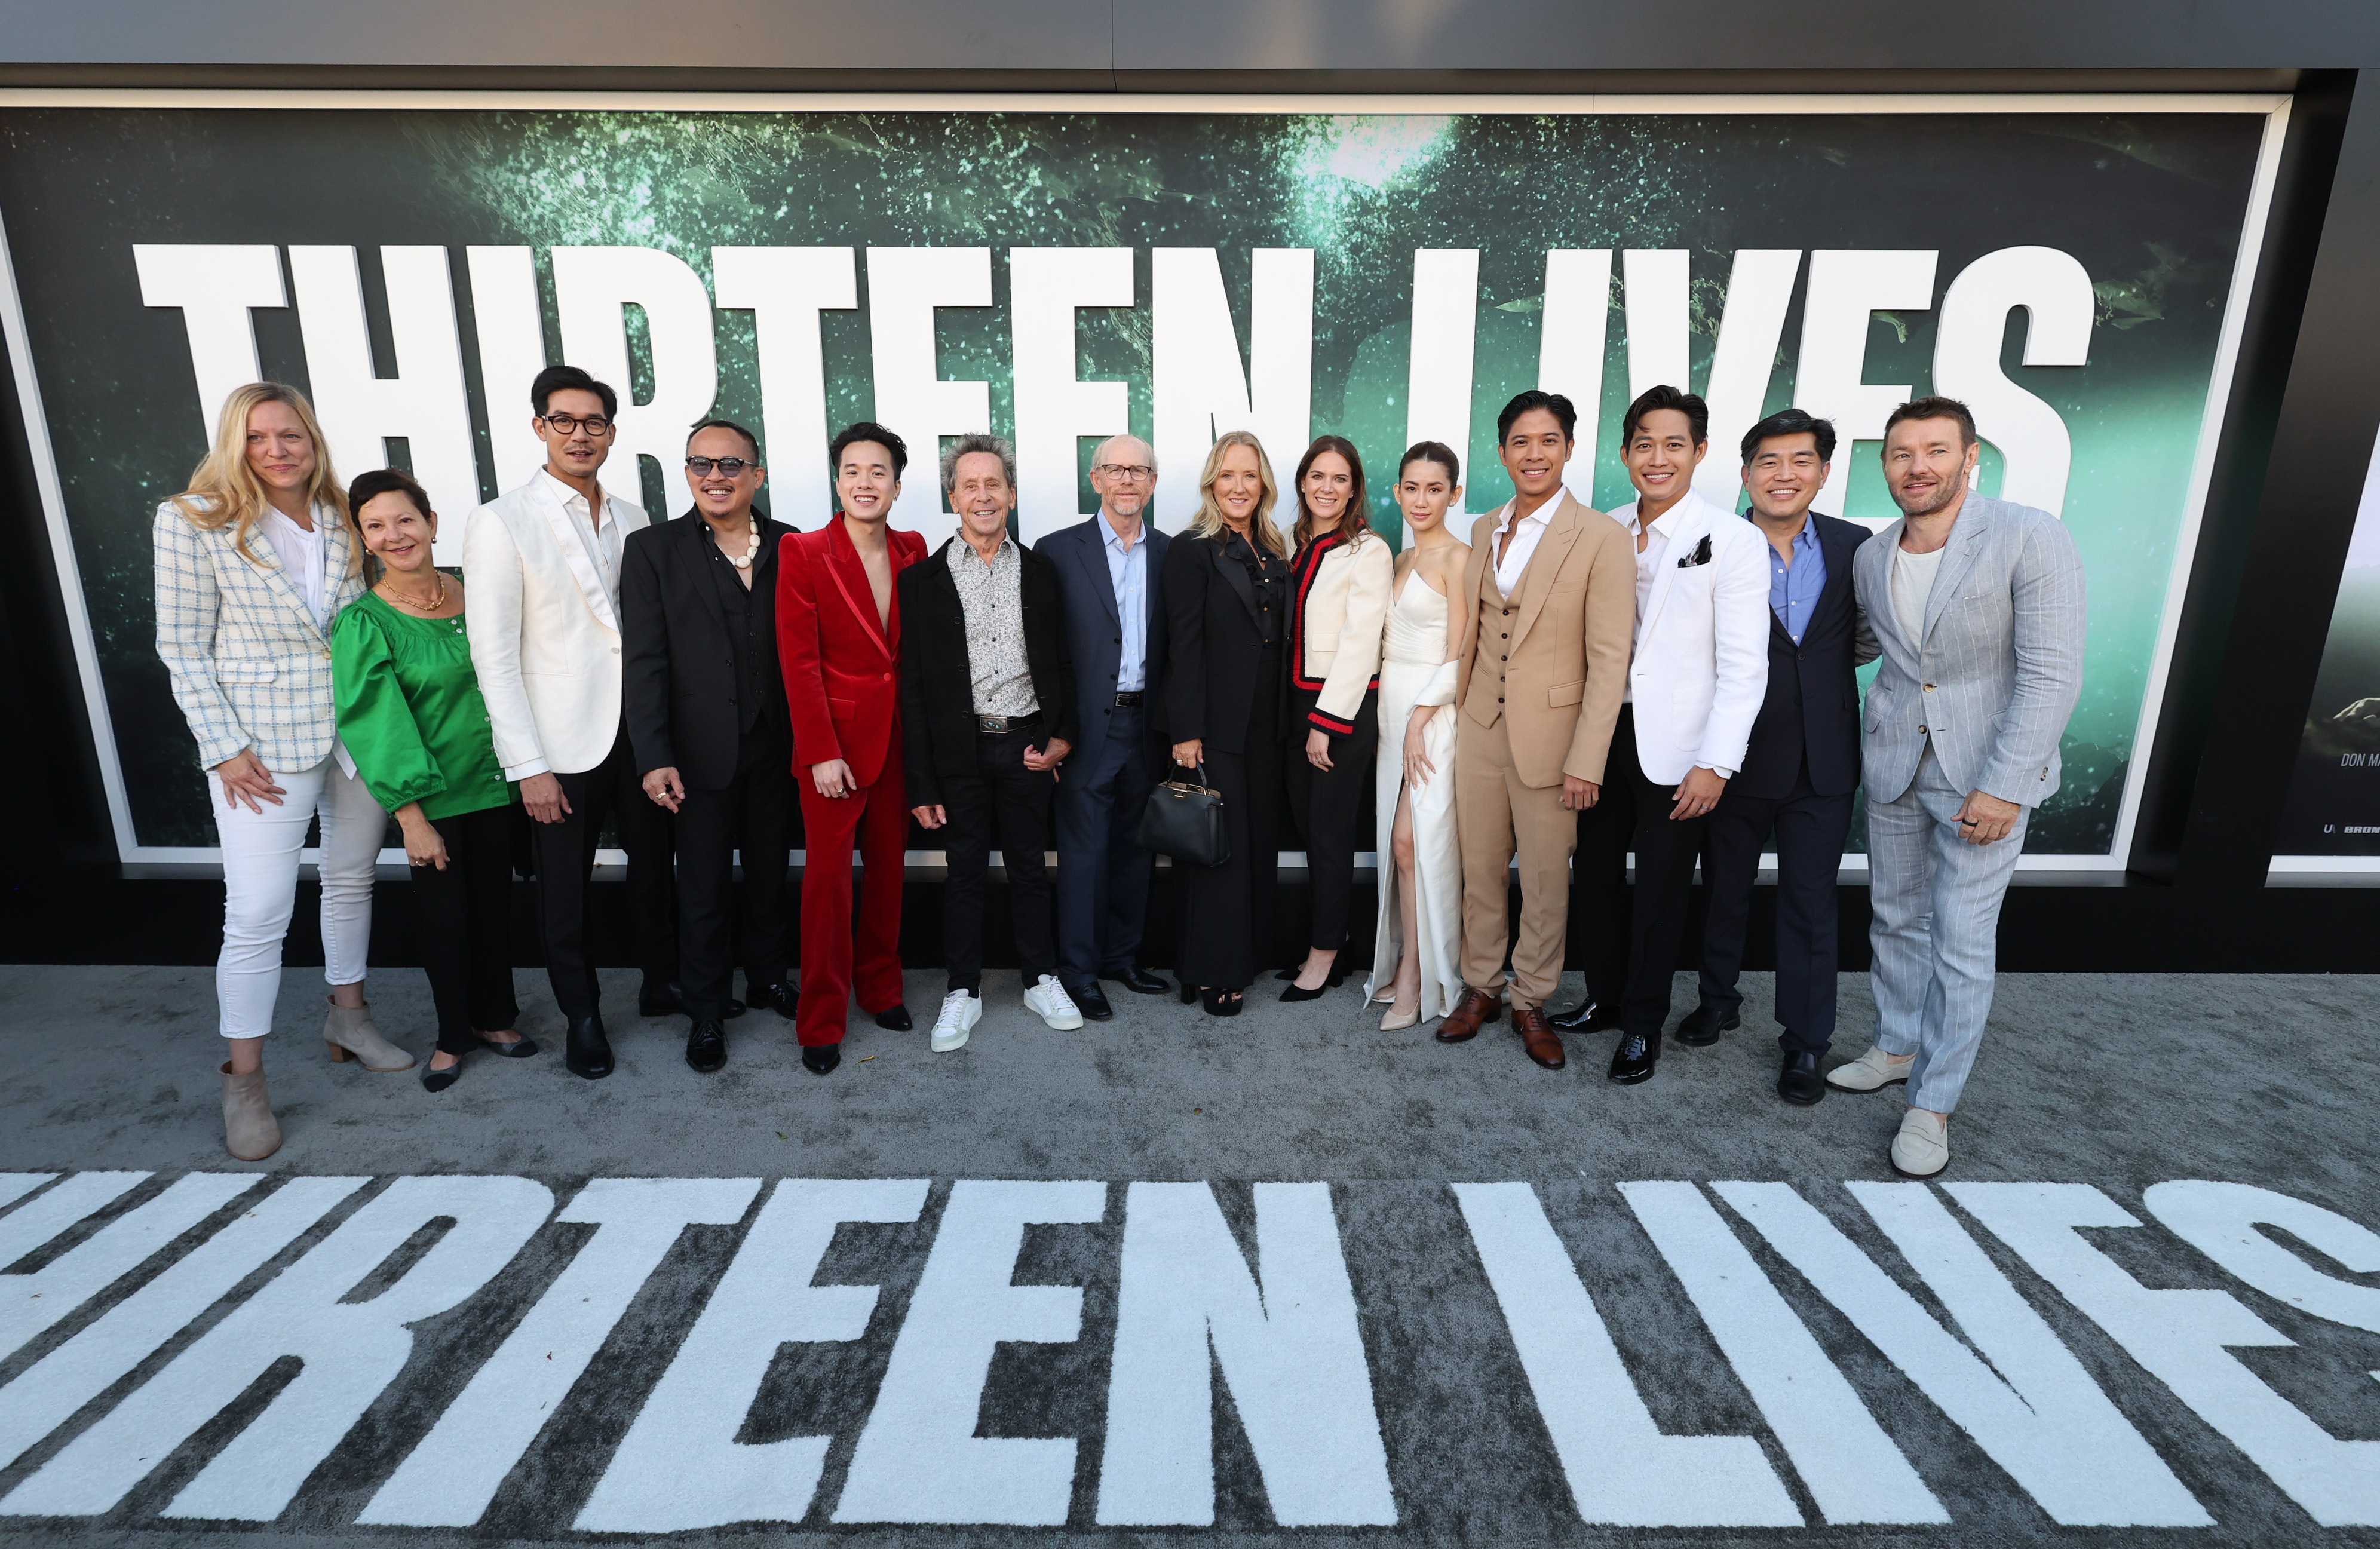 Cast and crew at the Hollywood premiere of 'Thirteen Lives. Courtesy: Eric Charbonneau